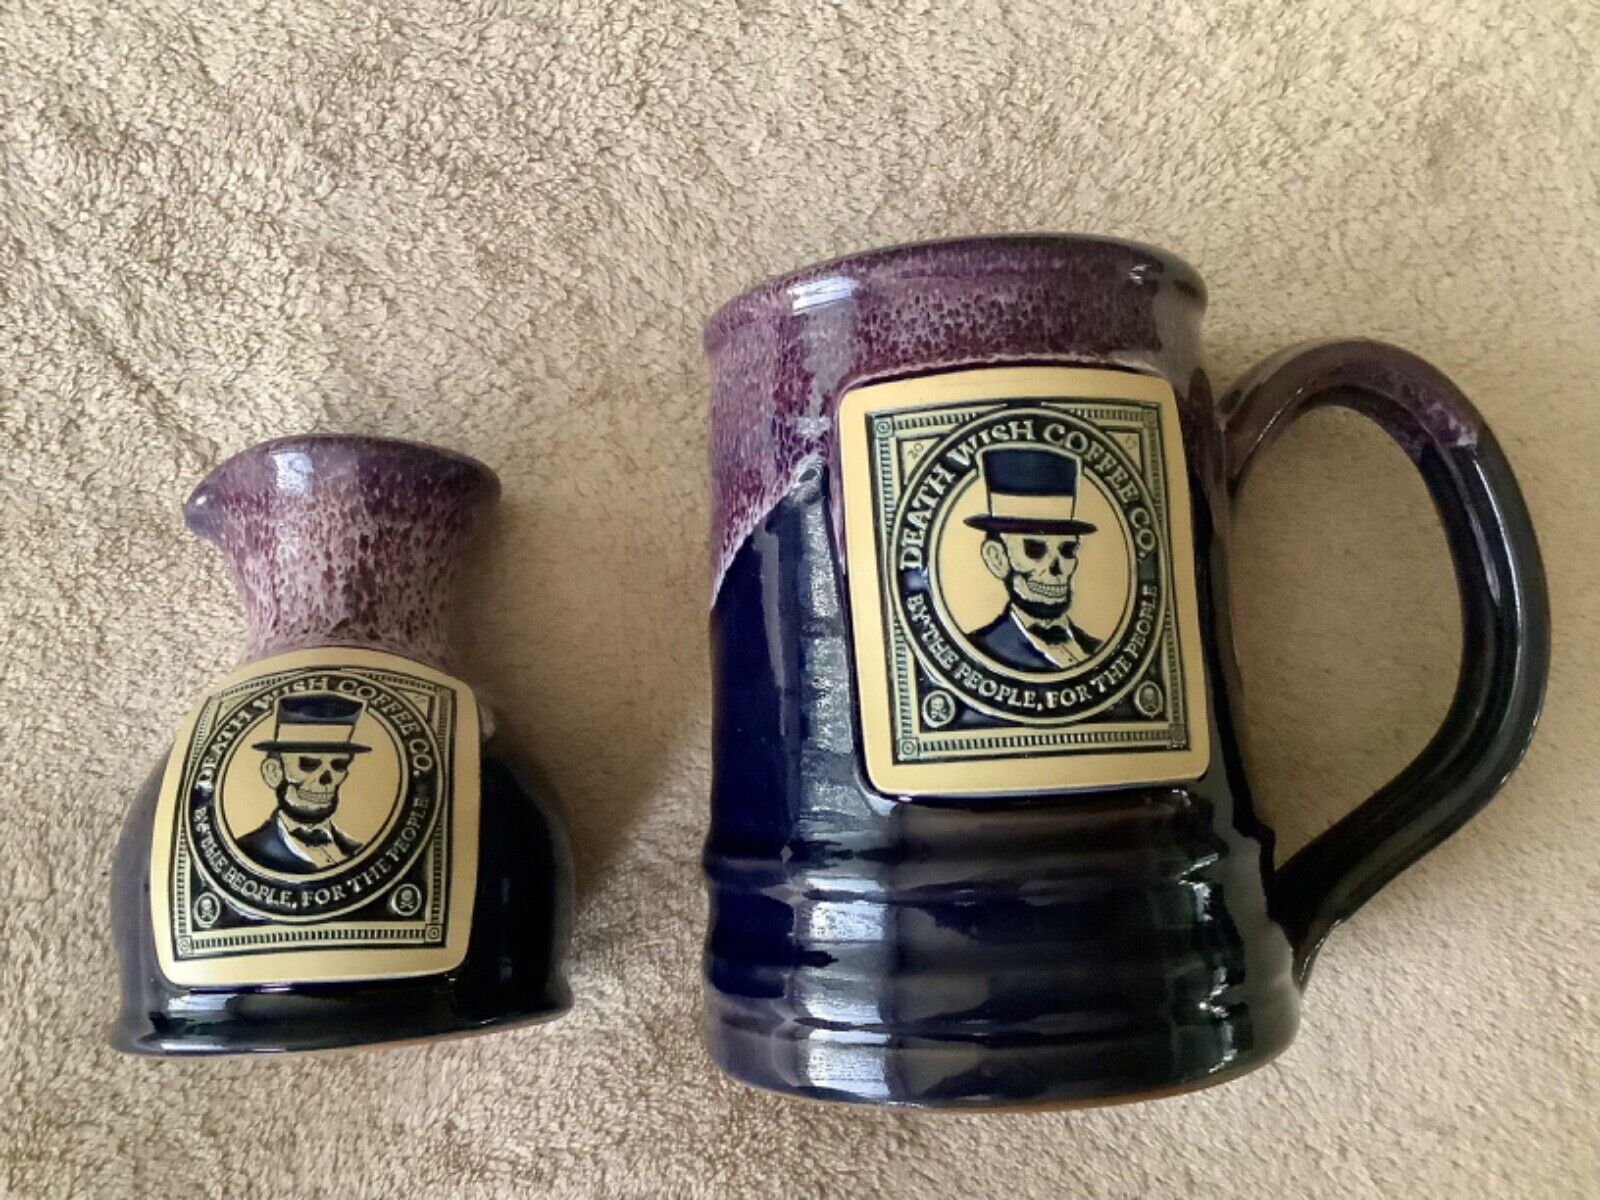 death wish coffee abe lincoln mug and creamer set deneen pottery 4th of july 